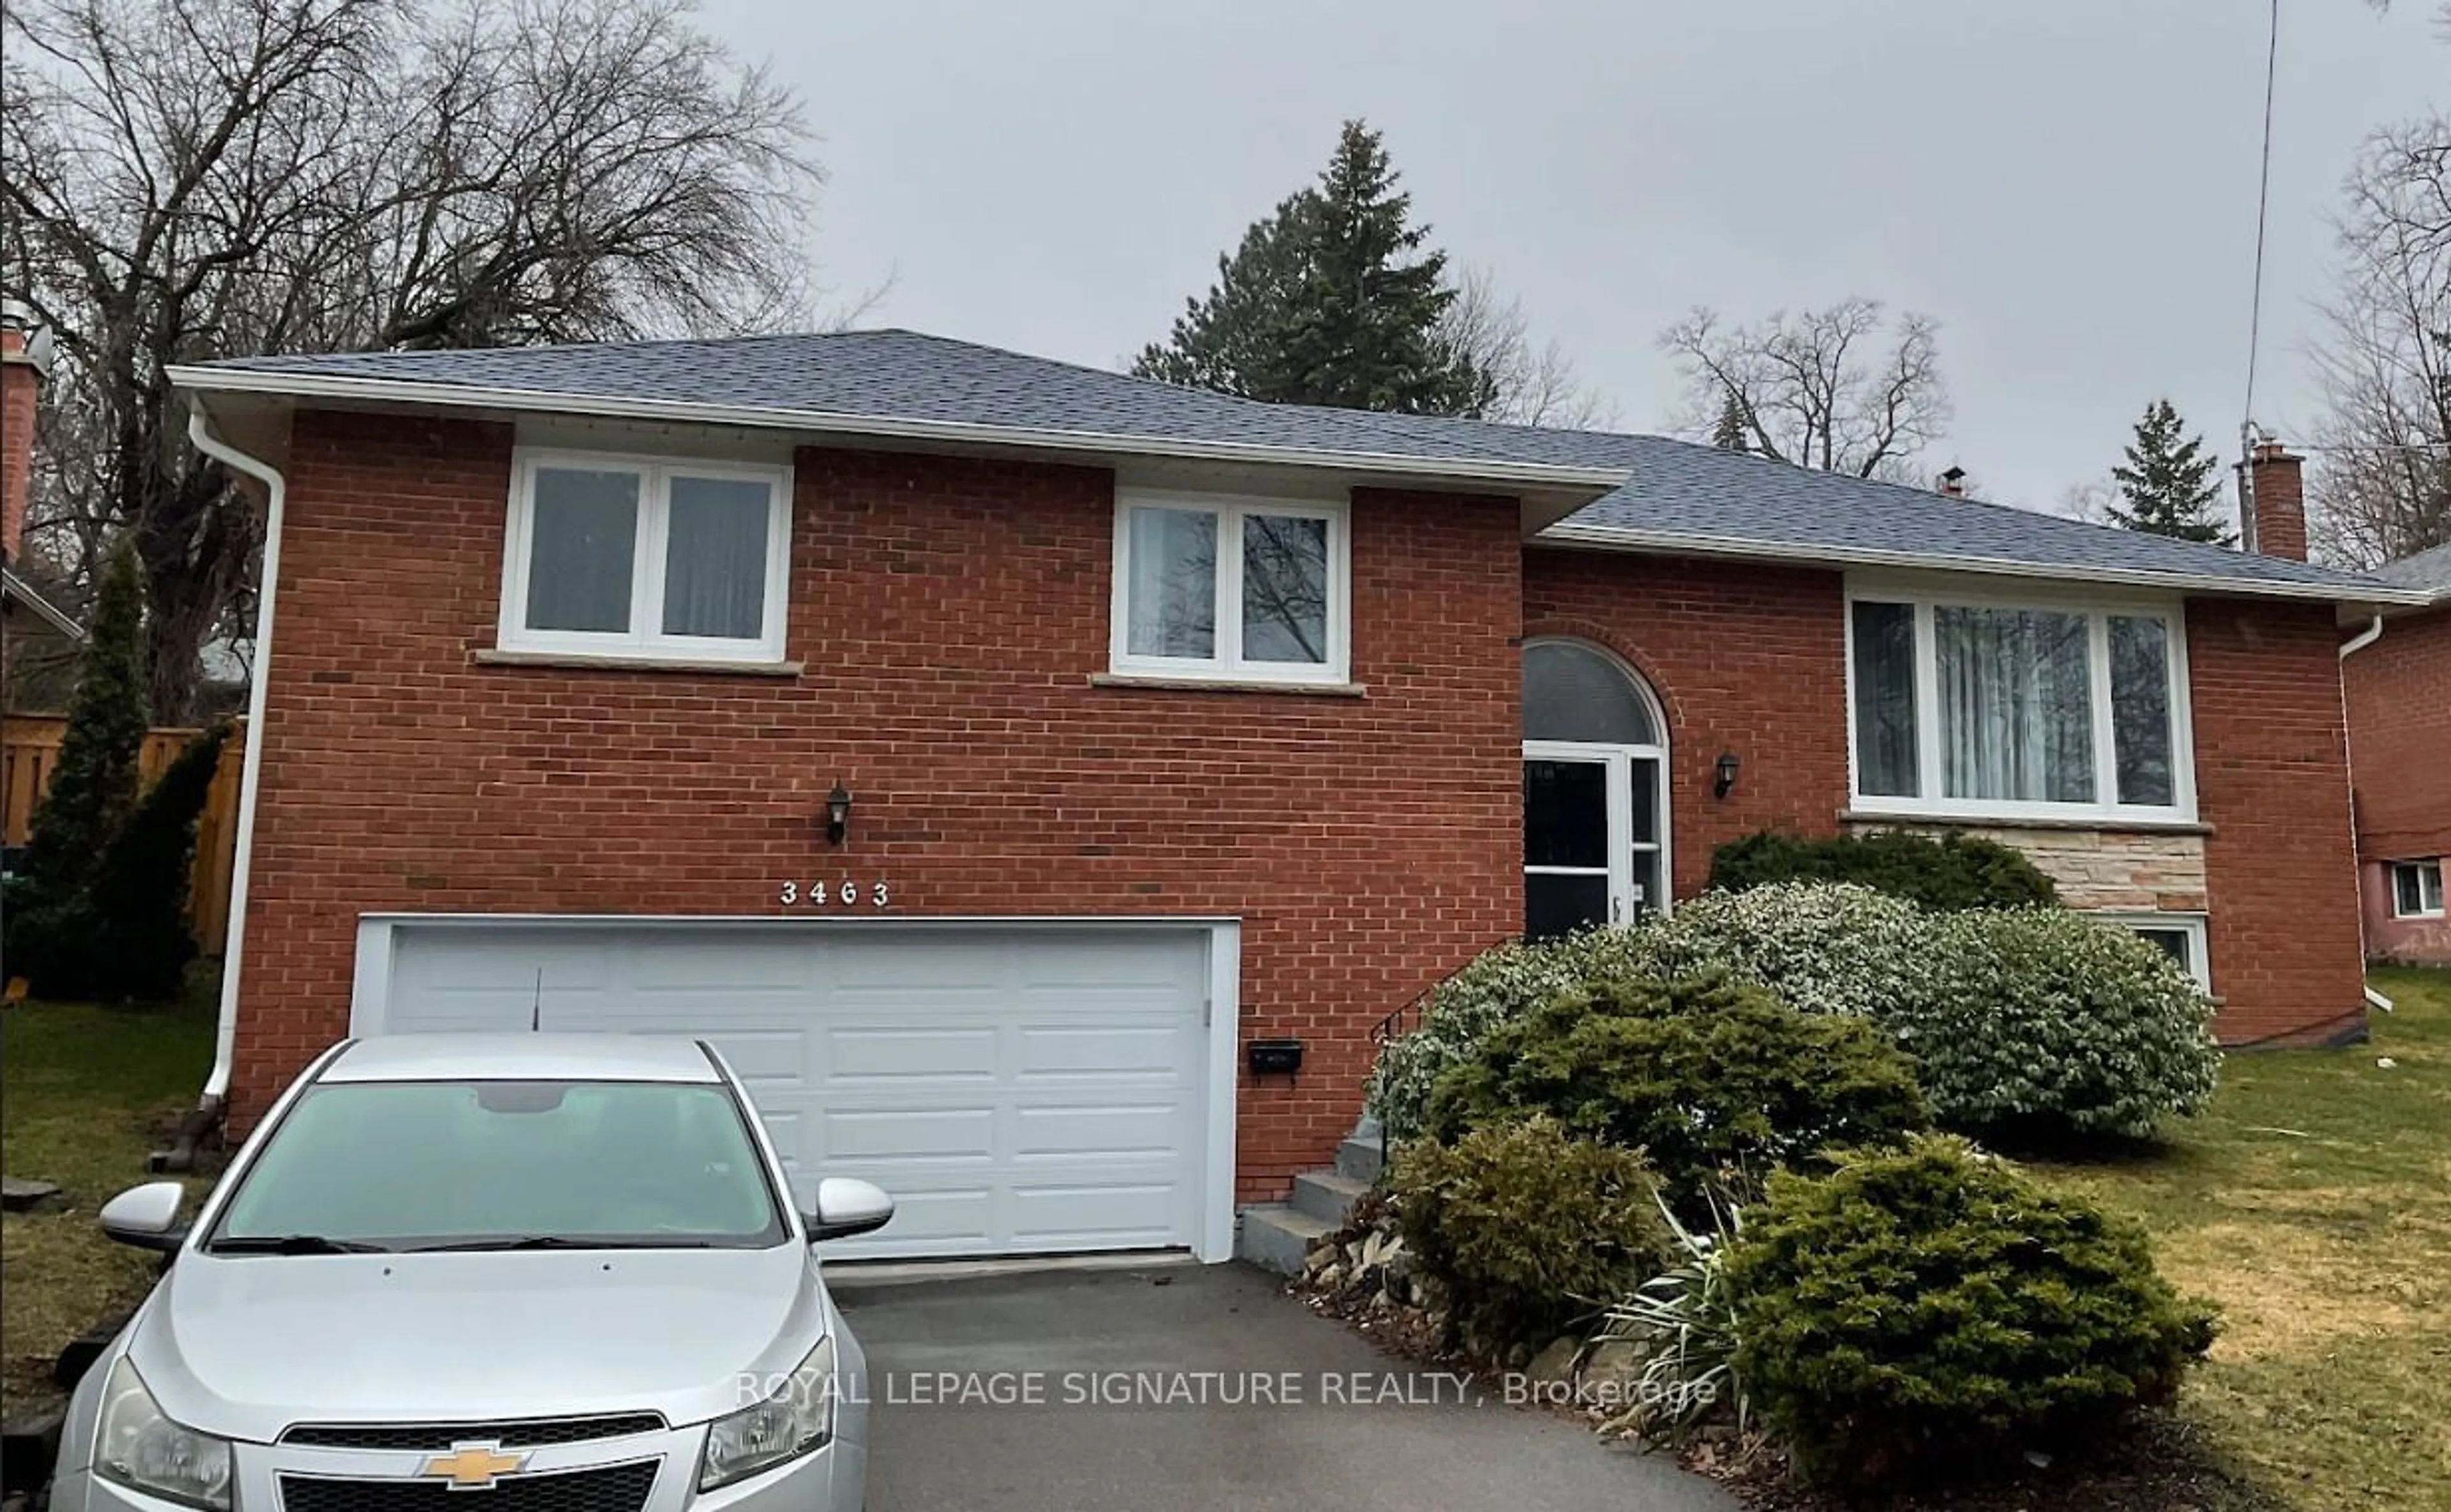 Home with brick exterior material for 3463 Credit Heights Dr, Mississauga Ontario L5C 2M2